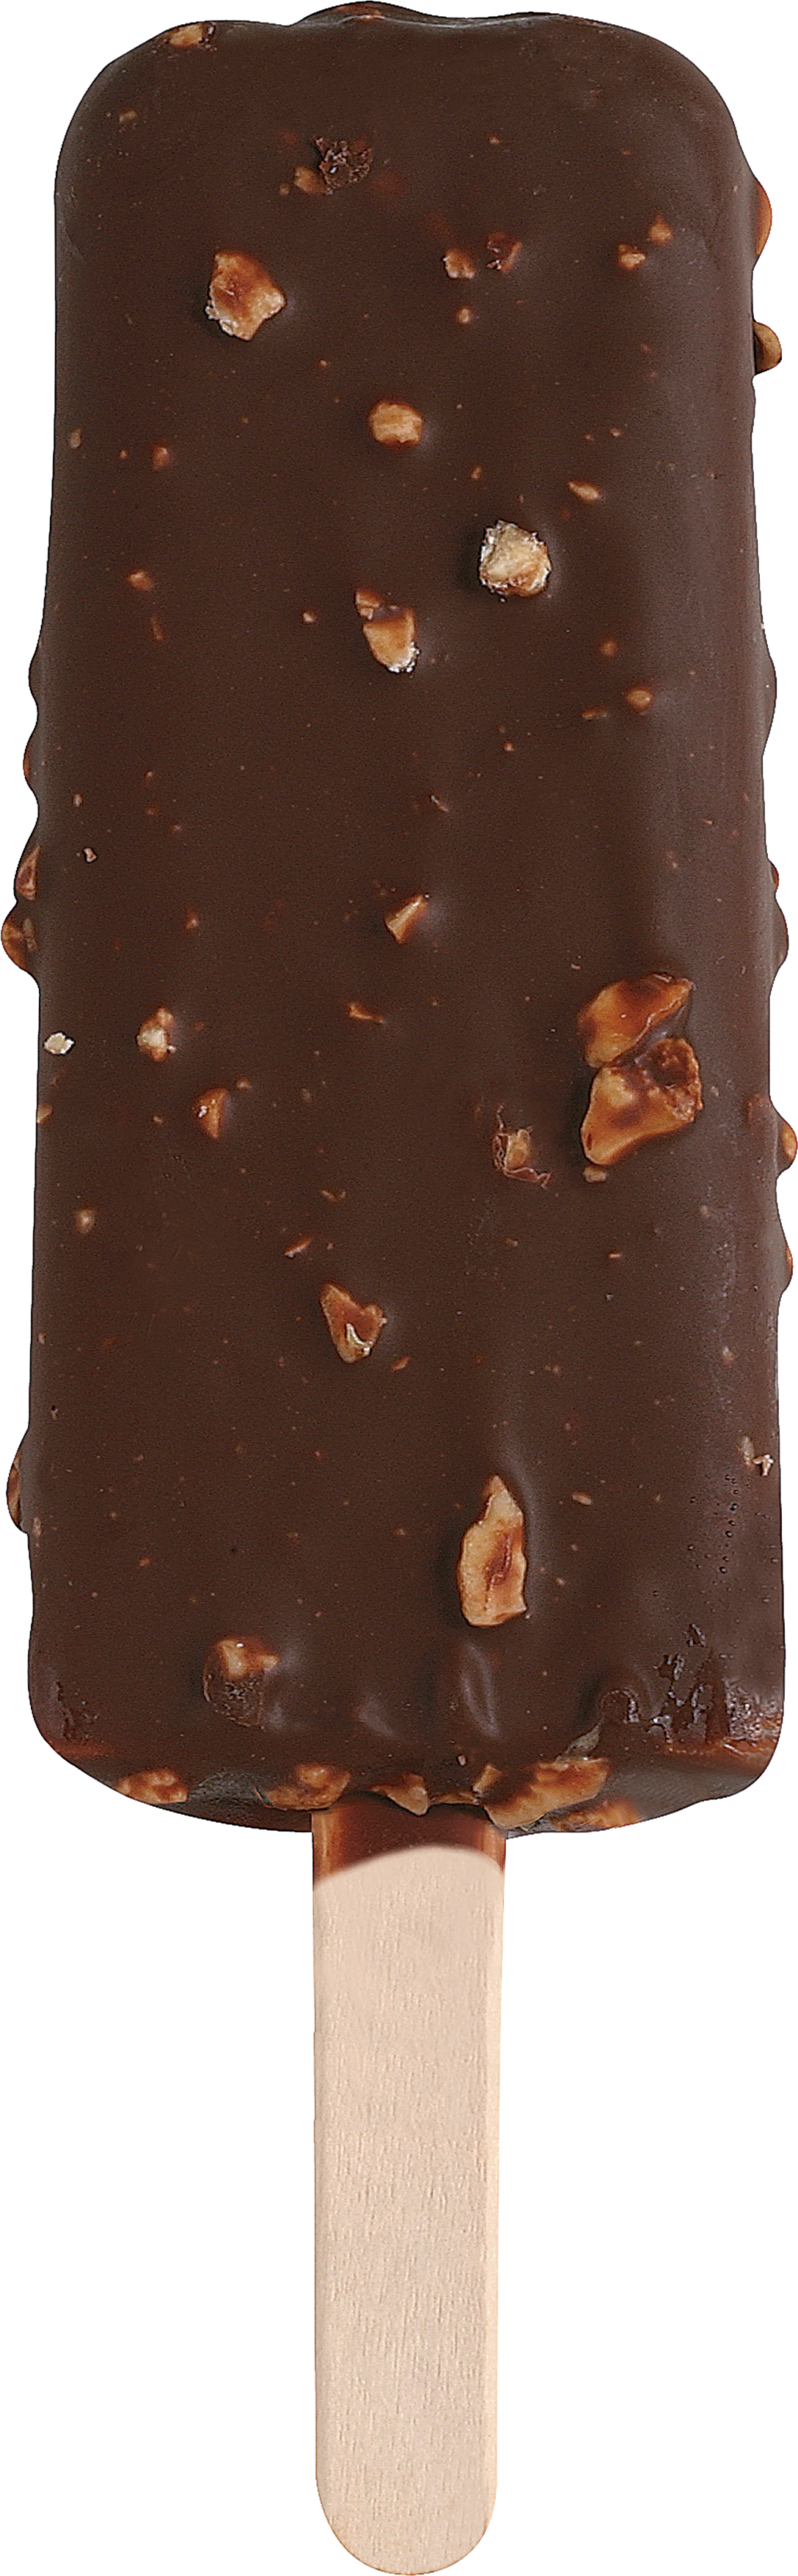 Chocolate Ice Lolly PNG Image